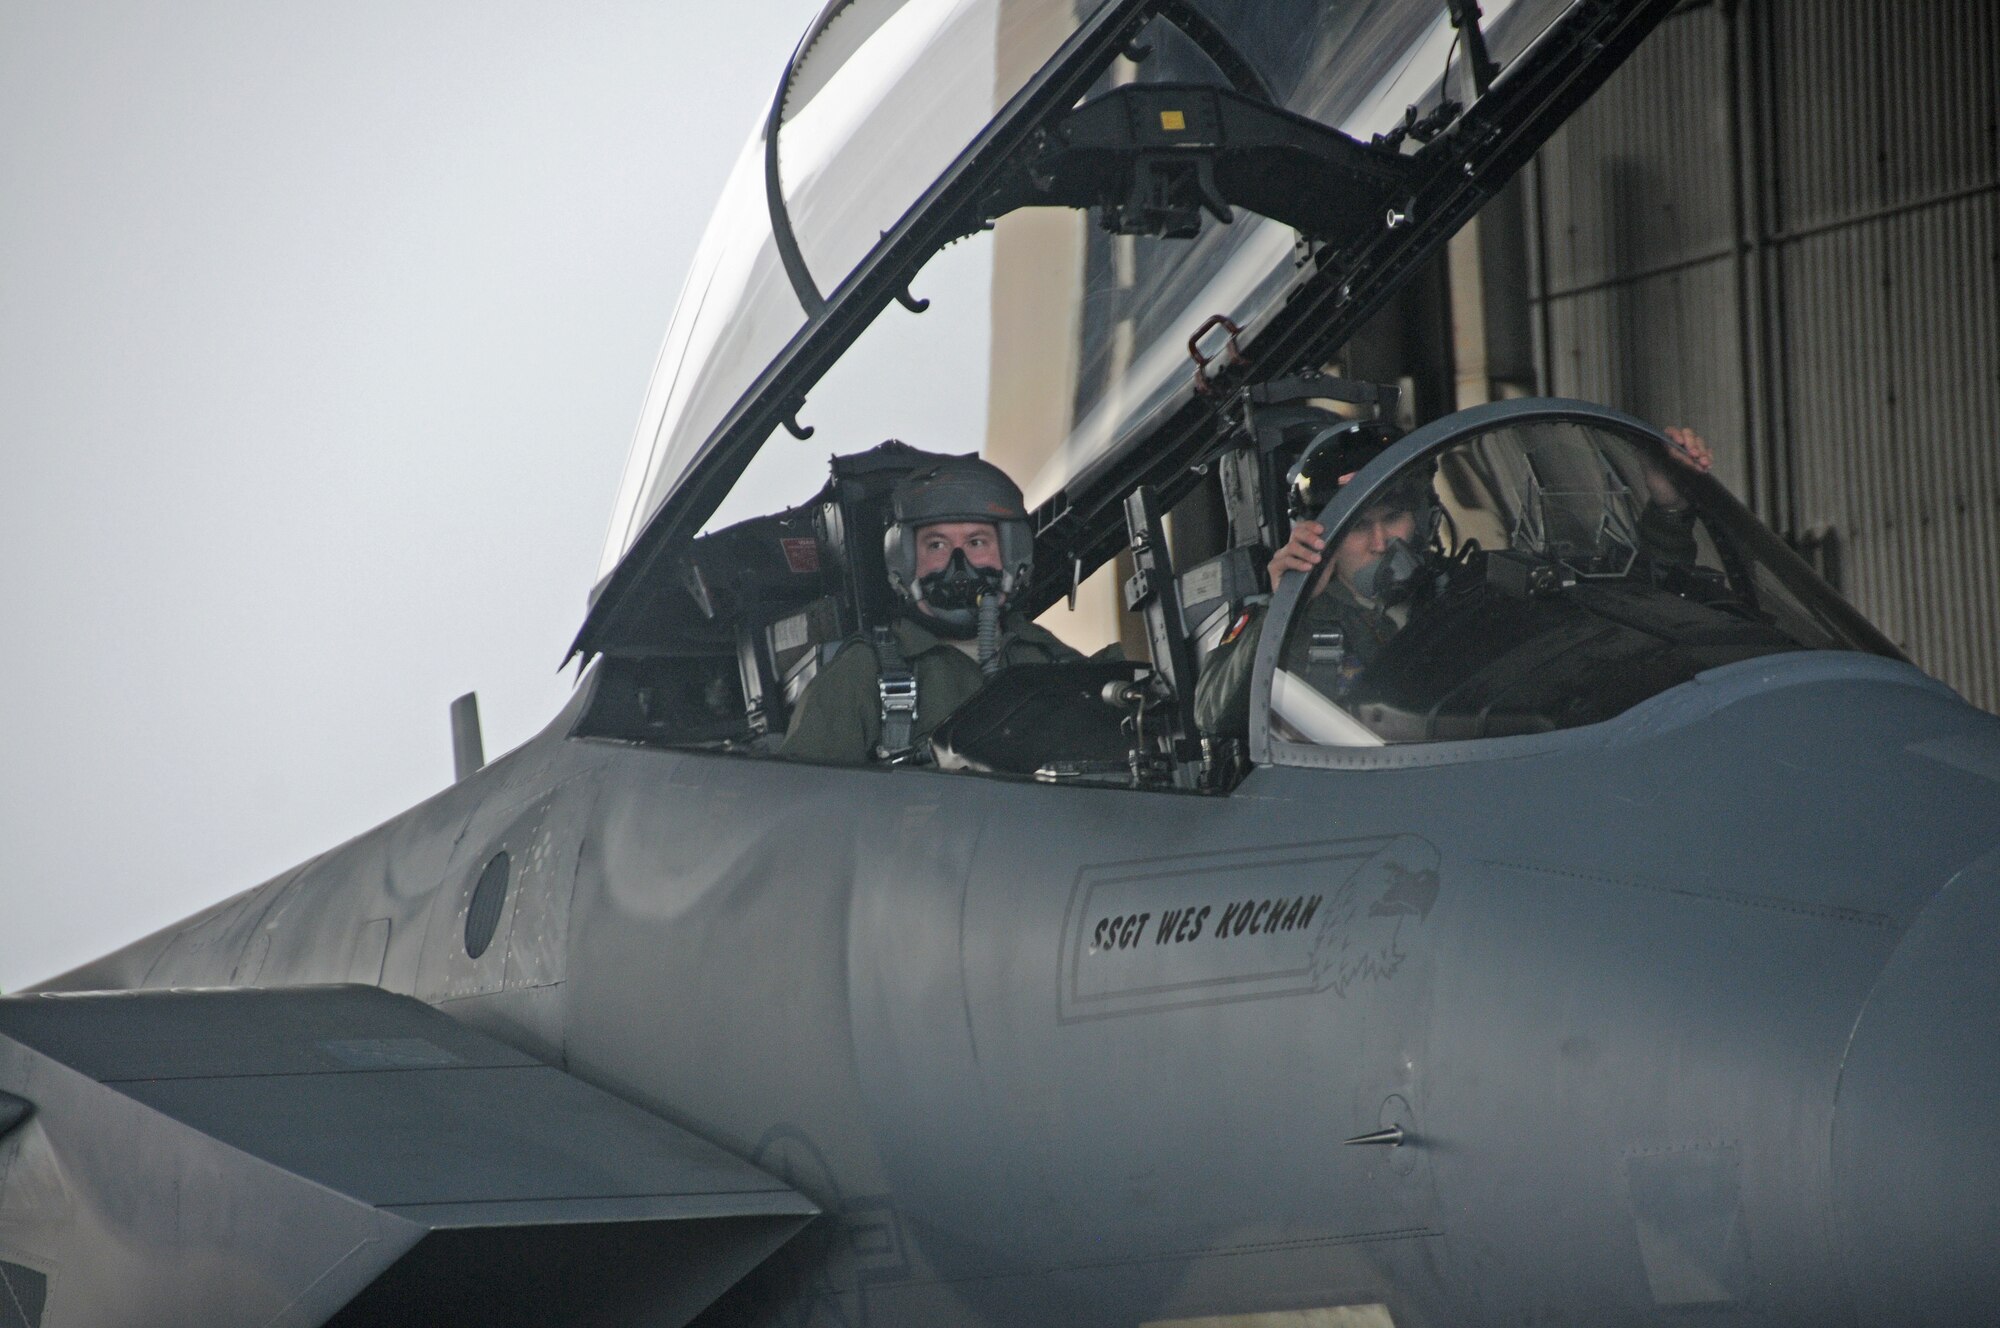 1st Lt. Scott McGowen sits in the cockpit of a waiting F-15 aircraft while preparing to make his first flight at the controls of the Eagle, Dec. 10, 2015. His instructor pilot Maj. Victor Knill, will ride in the backseat to ensure safety and provide feedback upon landing. (U.S. Air National Guard photo by Tech. Sgt. Jefferson Thompson)